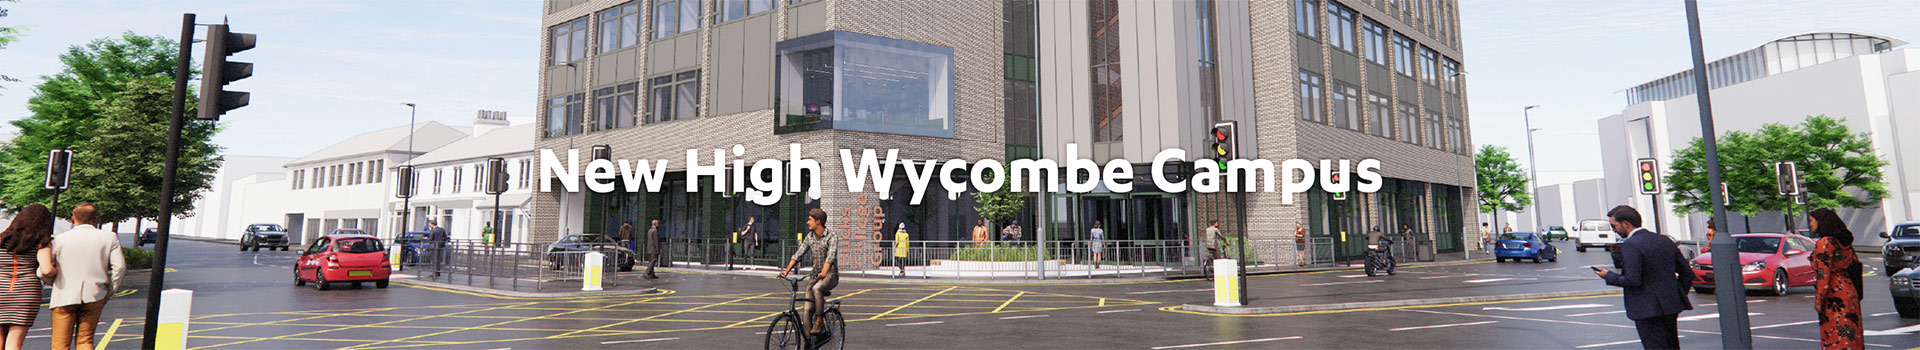 New High Wycombe Campus Banner